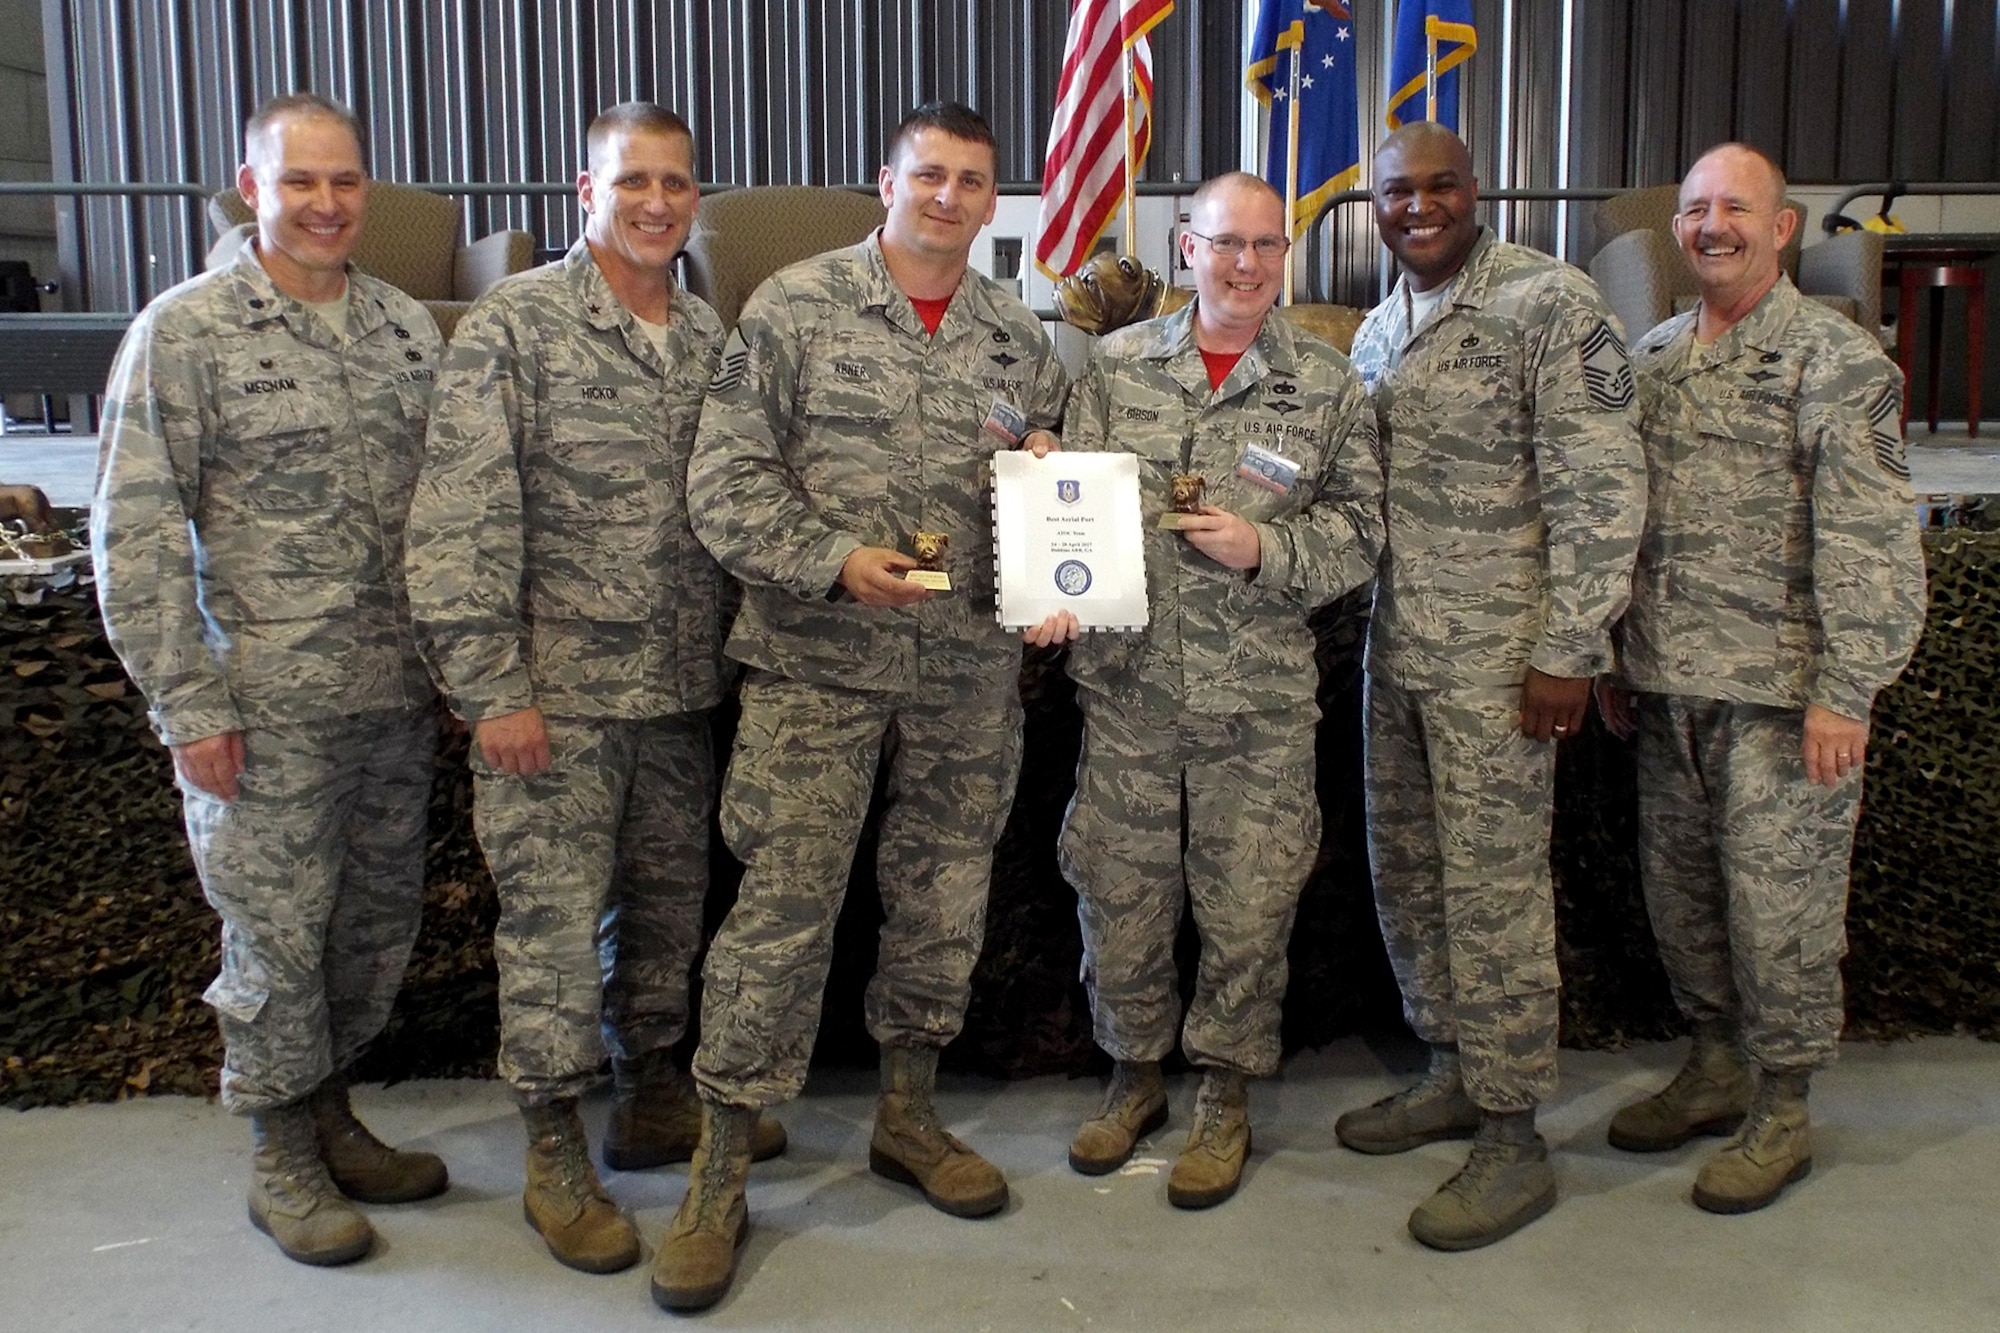 (Left to Right) U.S. Air Force Reserve Lt. Col. Keith Mecham, commander, 67th Aerial Port Squadron, Brig. Gen. John A. Hickok, deputy director of logistics, engineering and force protection, Headquarters Air Force Reserve Command, Master Sgt. Morgan Abner, 96th Aerial Port Squadron, Tech Sgt. Jason Gibson, 96th APS, Chief Master Sgt. Darius Drummond, air transportation career field manager, Headquarters Air Force, and Chief Master Sgt. Richard Hiney, Port Dawg Challenge Chief, and superintendent, 27th Aerial Port Squadron, pose for a photo after receiving the award for “Best ATOC Mission Load Report Team” during the 2017 Air Force Reserve Command Port Dawg Challenge awards ceremony April 27, 2017, at Dobbins Air Reserve Base, Ga. Twenty-three teams competed in 12 events over three days to prove their air transportation skills. (U.S. Air Force photo by Tech. Sgt. Debra Gentry/Released)